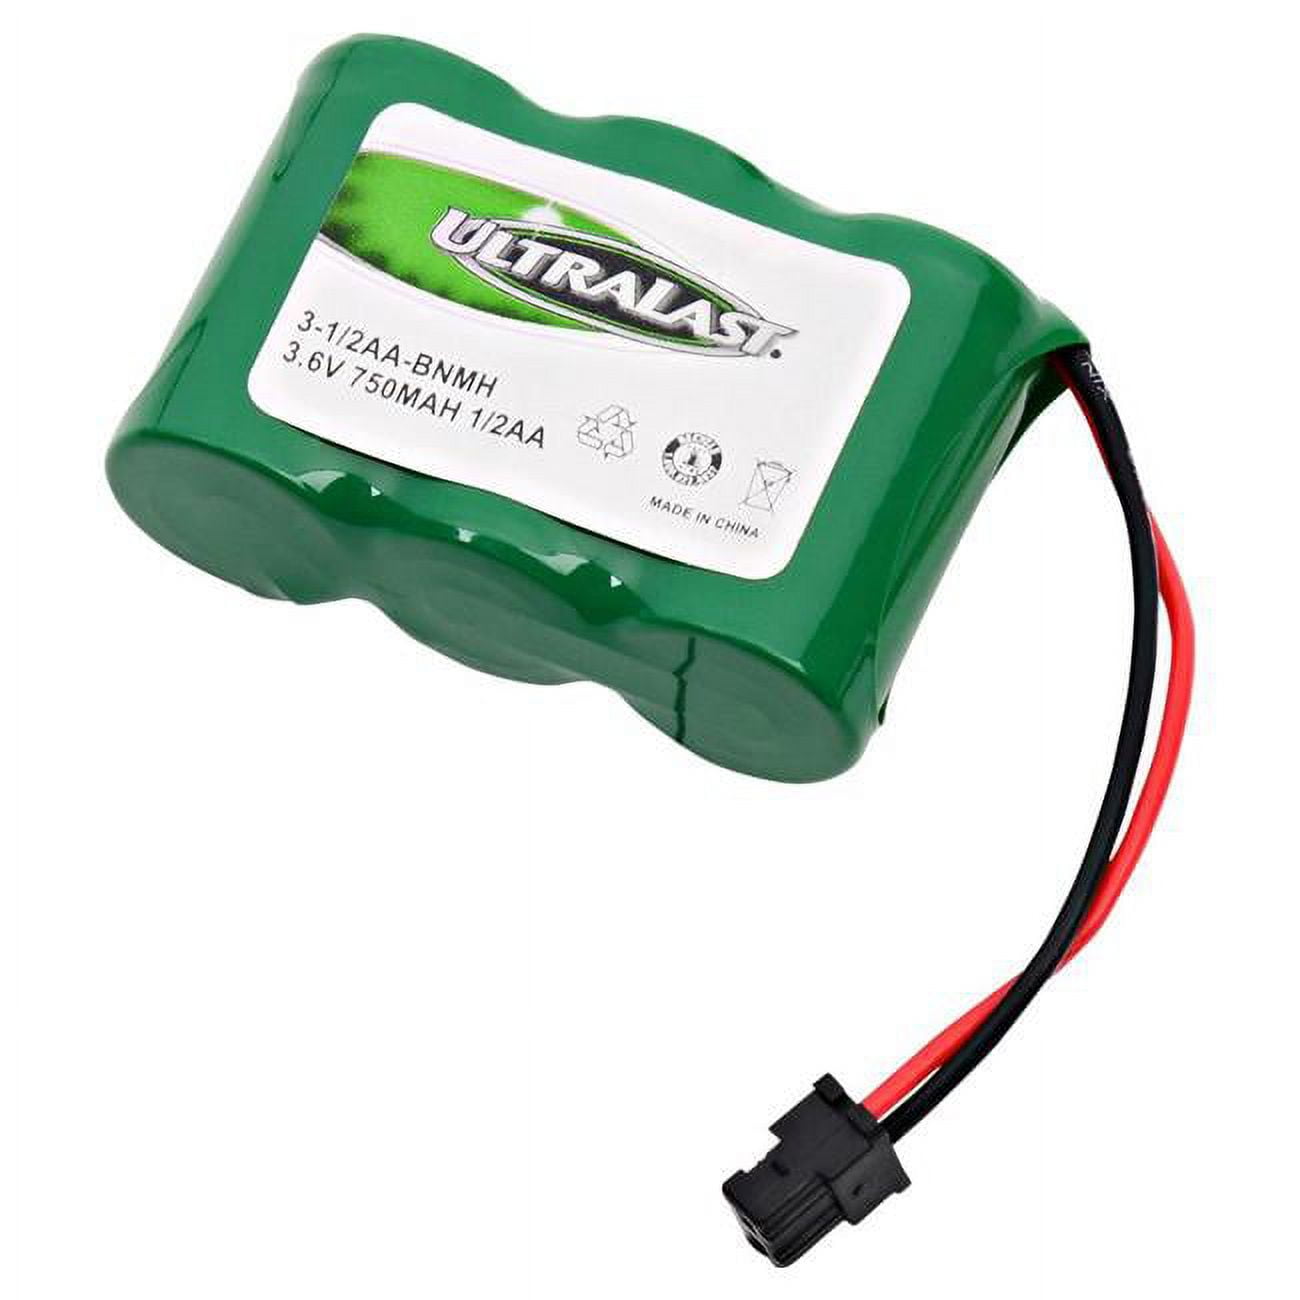 Picture of Ultralast 3-1-2AA-BNMH 3.6V & 750 mAh Replacement Nickel Metal Hydride Battery for AT&T - 24027 Cordless Phone